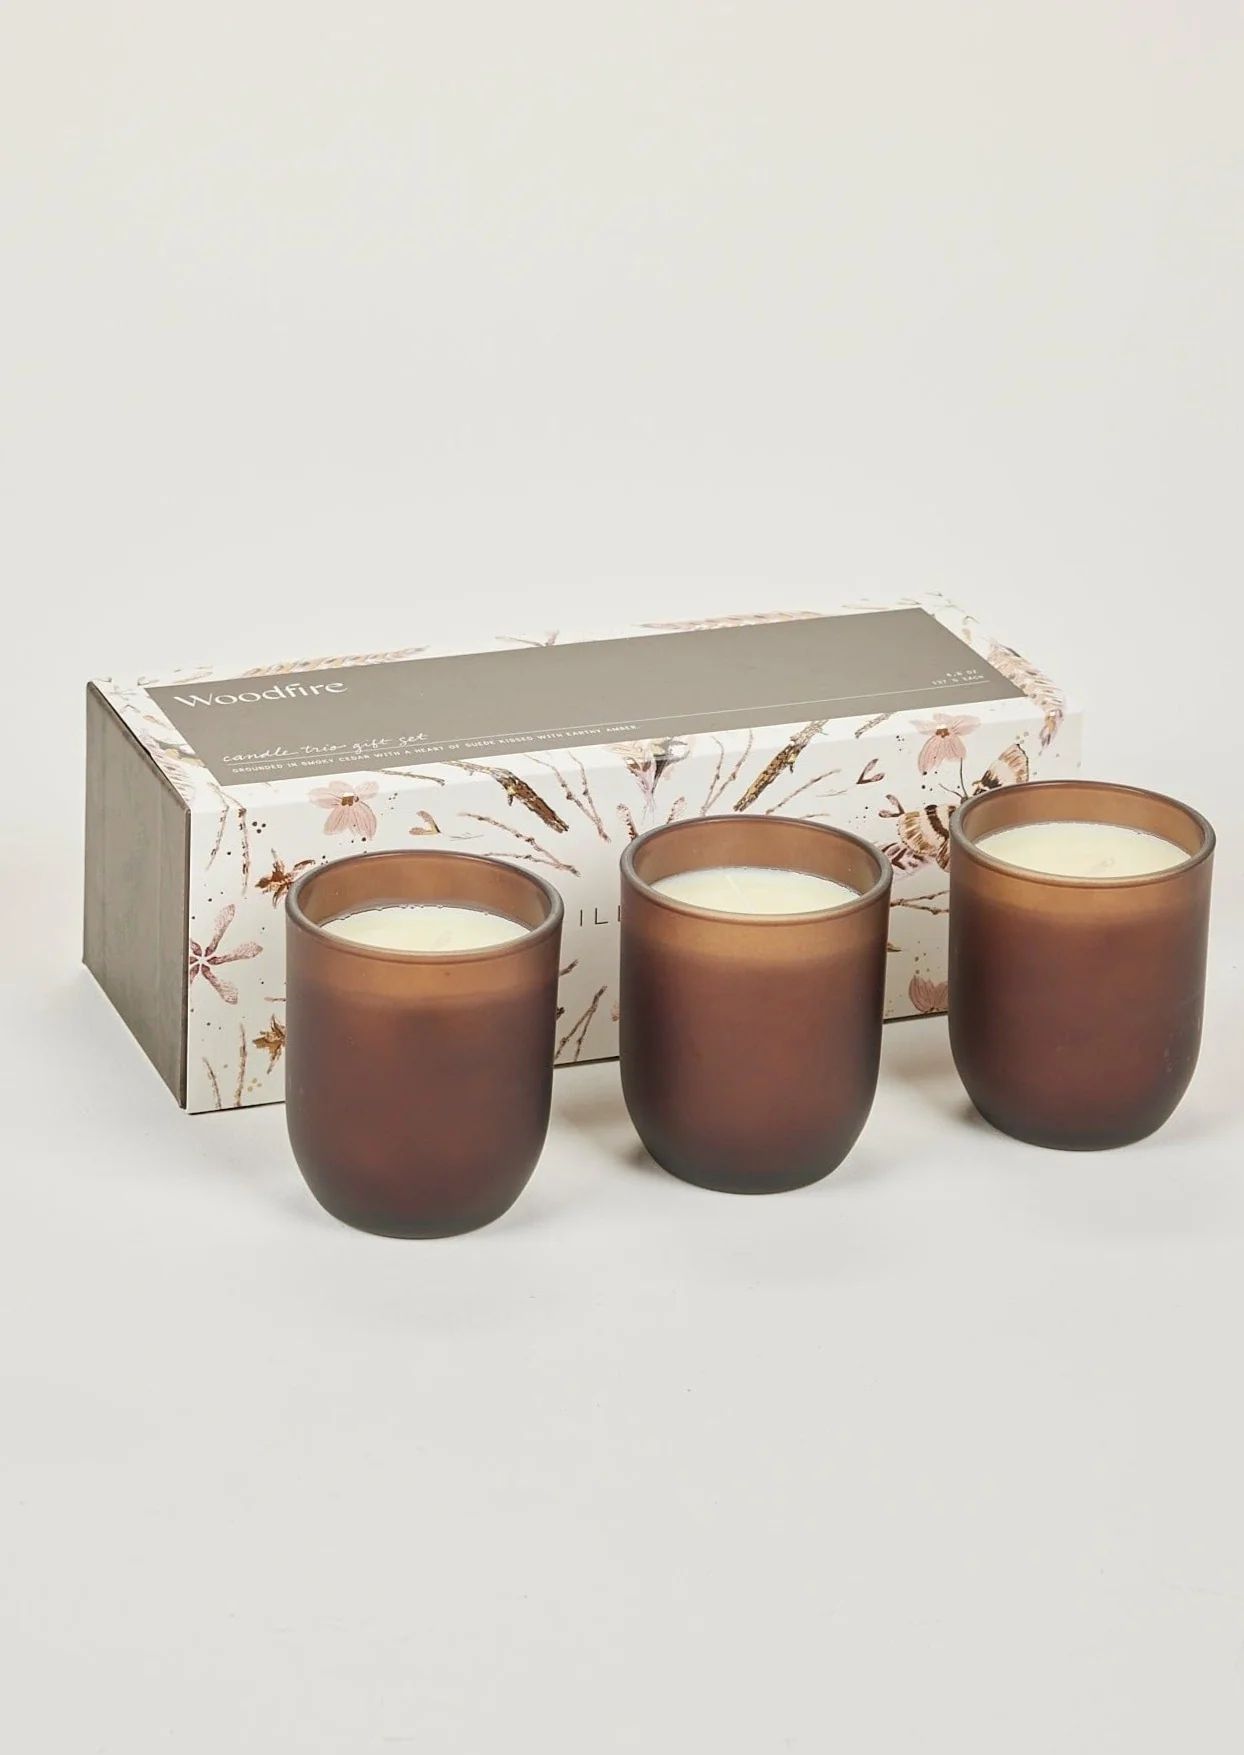 Set of Woodfire Scented Candles | Fall Decor at Afloral.com | Afloral